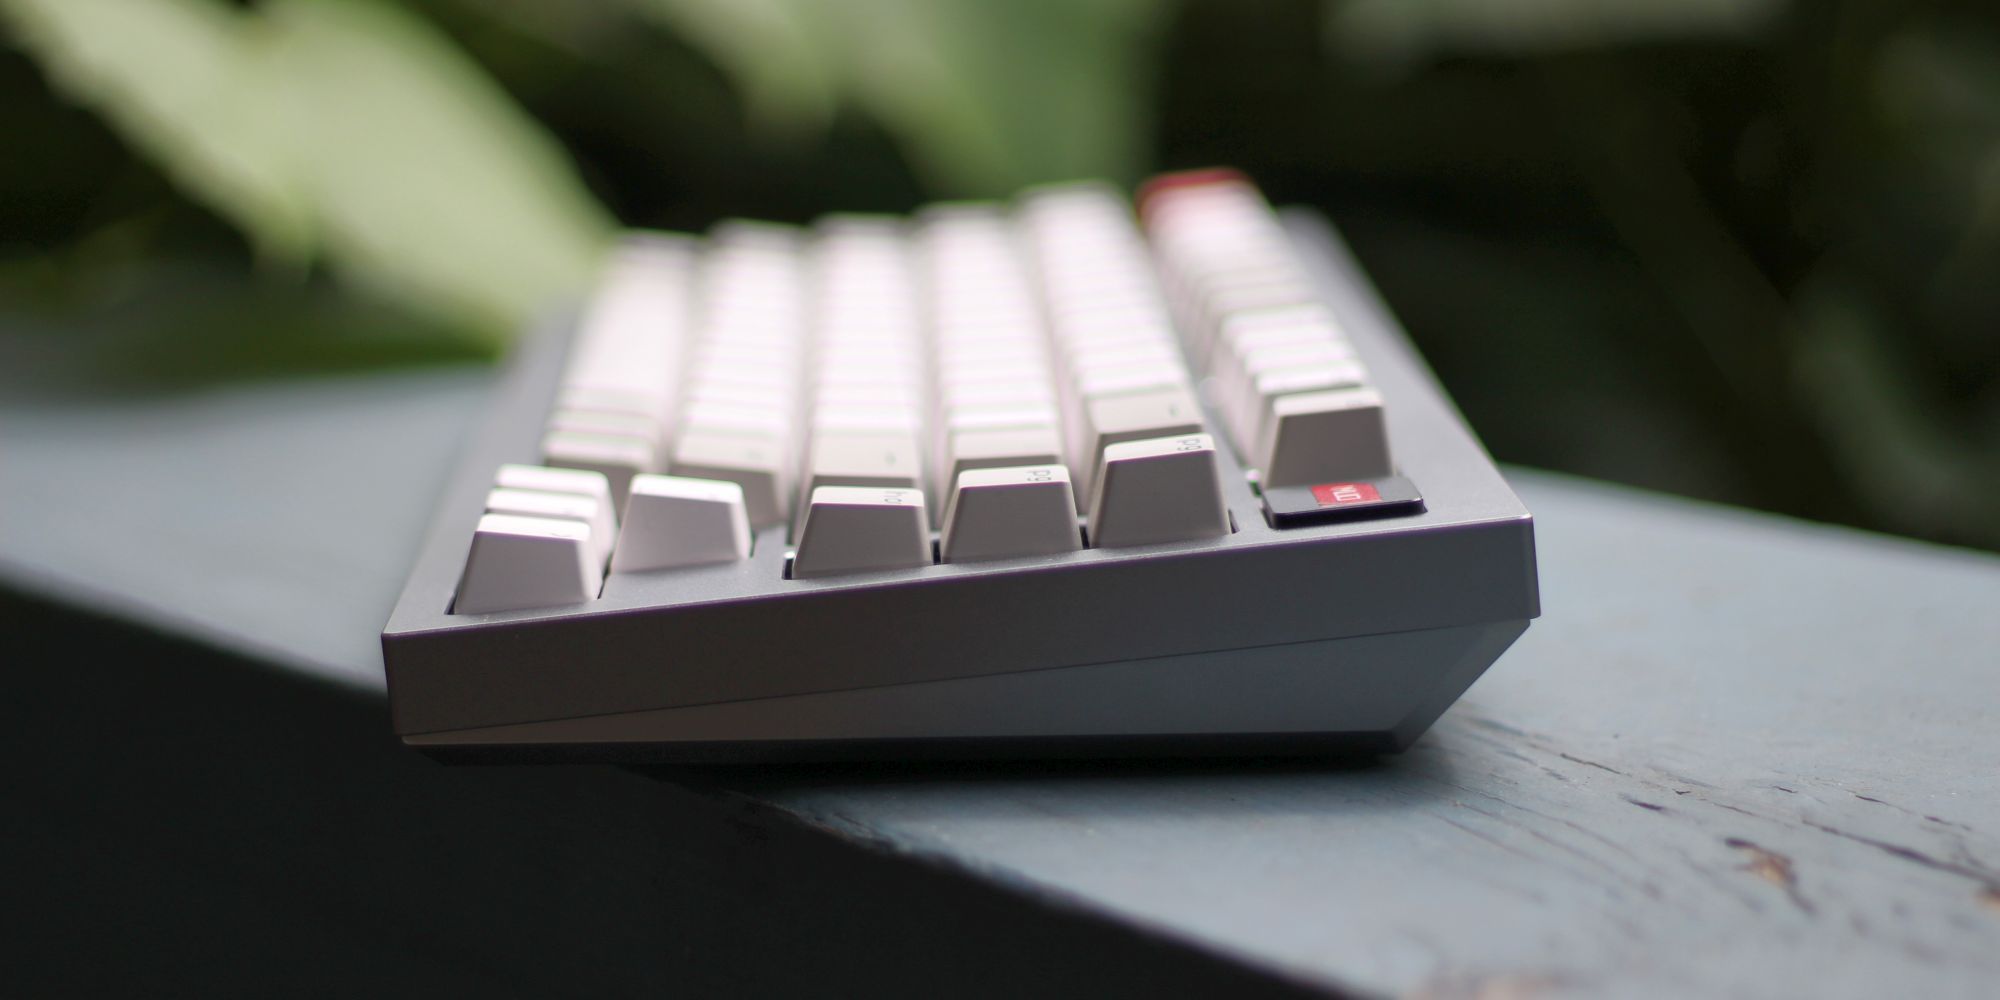 keychron-q1-mechanical-keyboard-review-outside-side-02